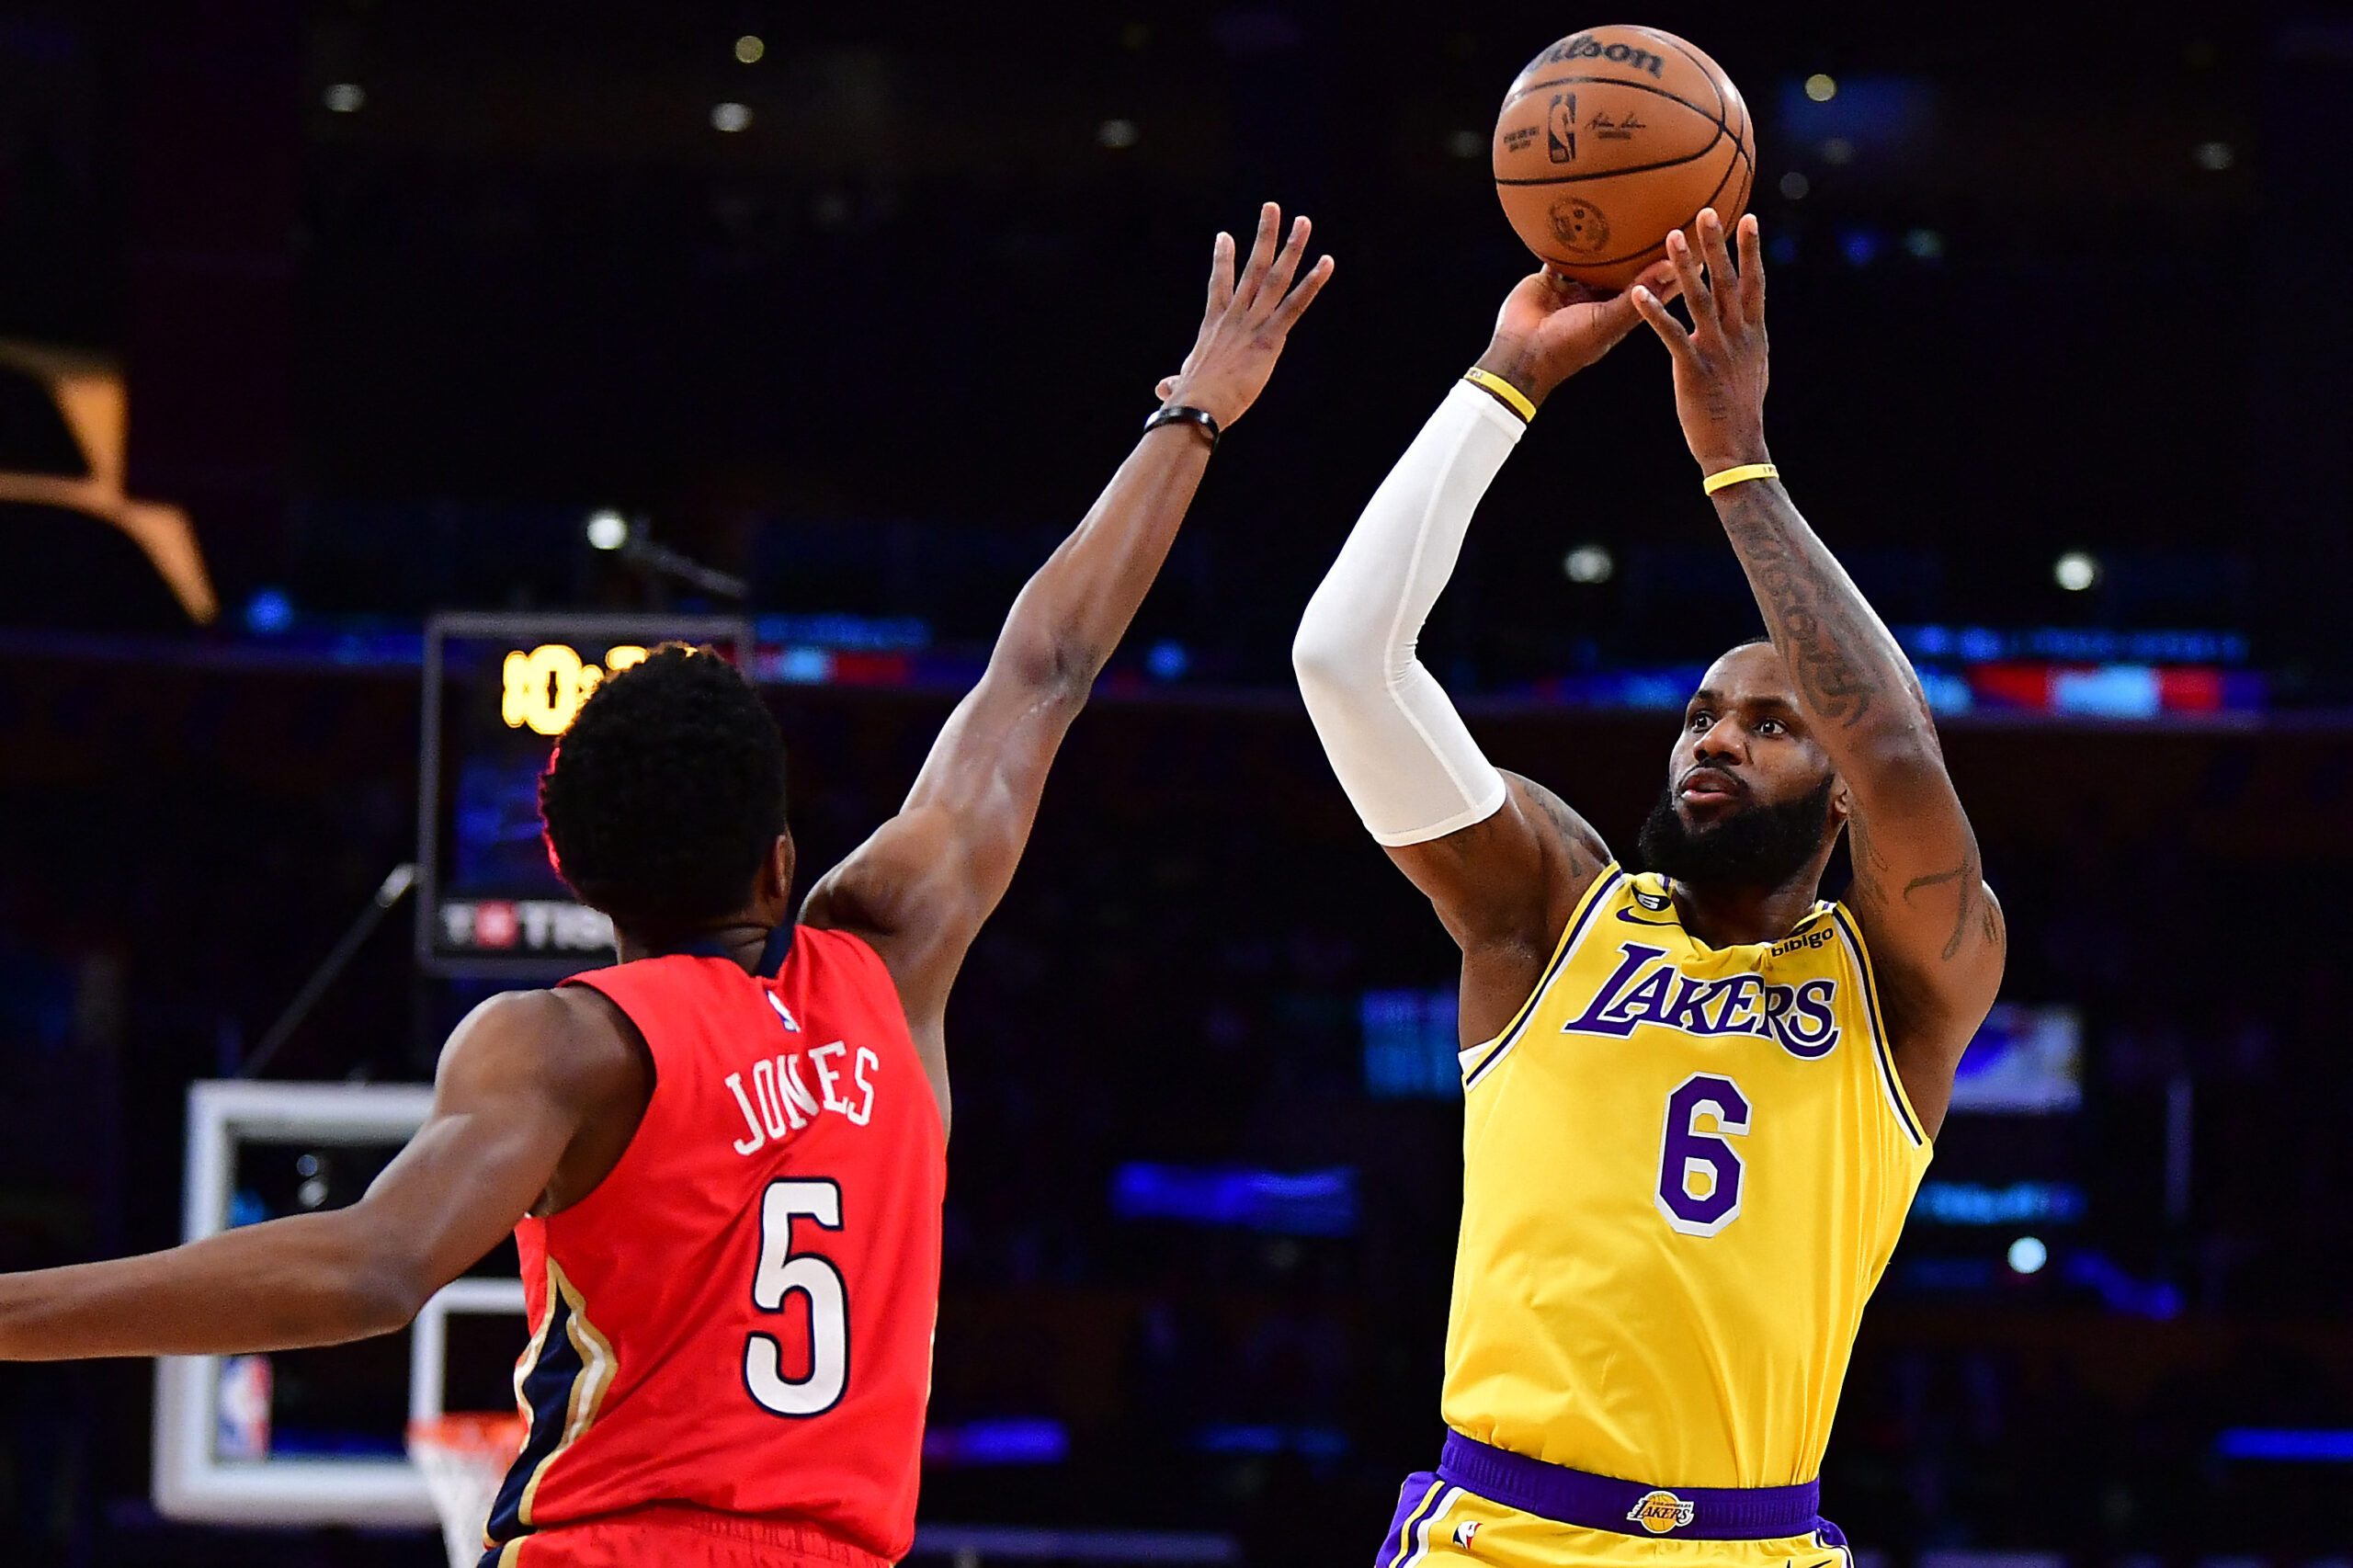 LeBron James drops 21 in return as Lakers whip Pelicans